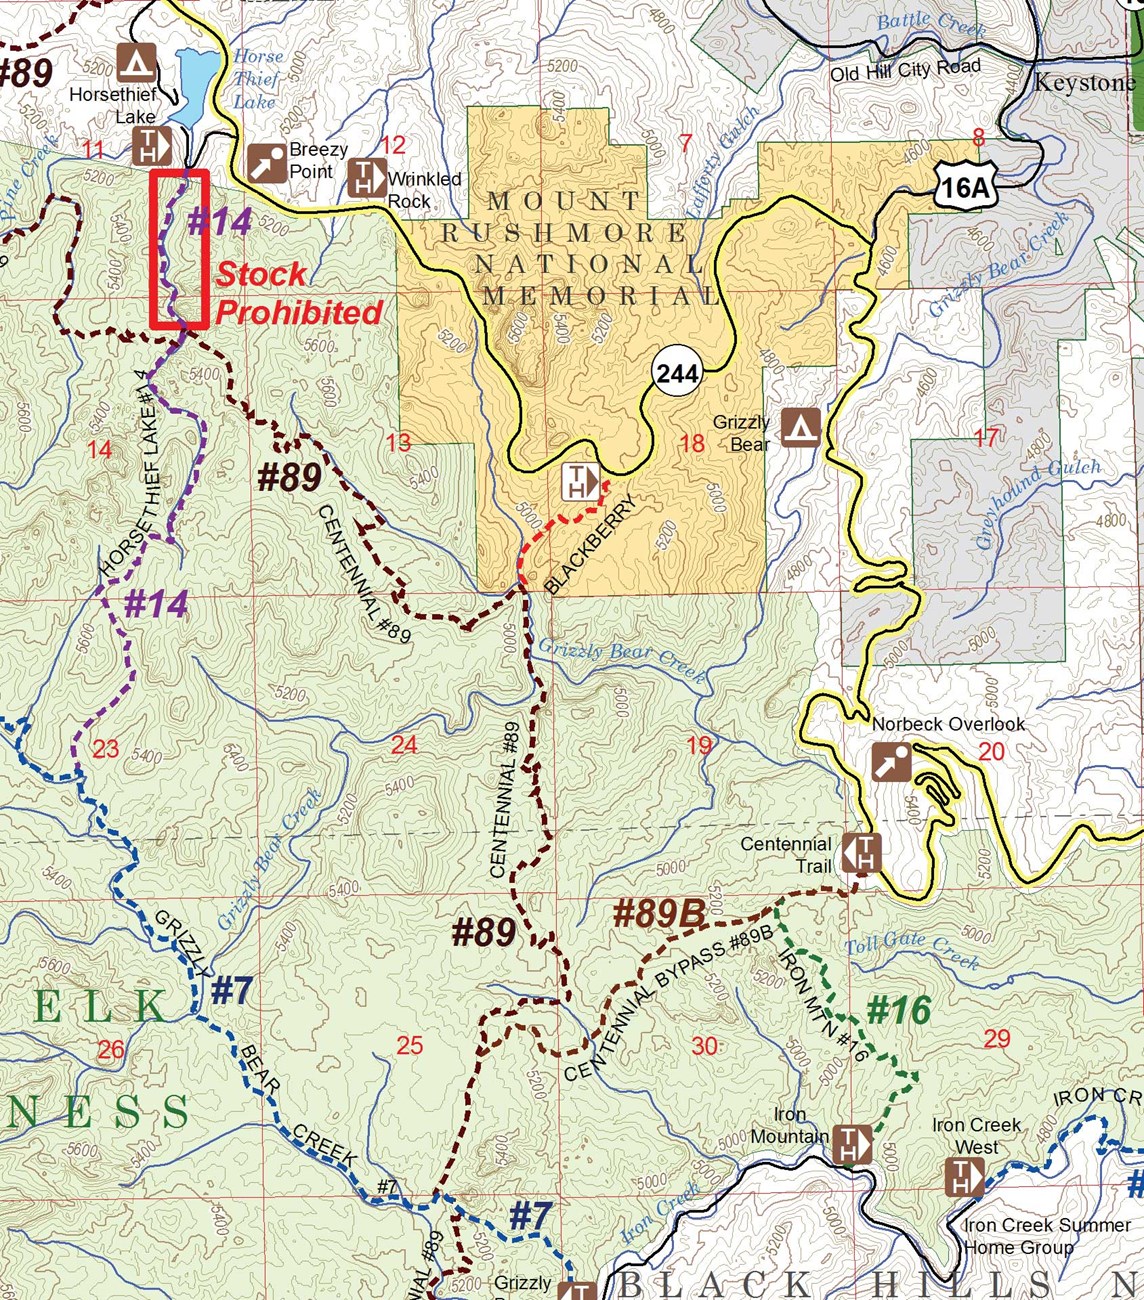 Image of a hiking trail map showing the Blackberry Trail and nearby trails in the Black Elk Wilderness.